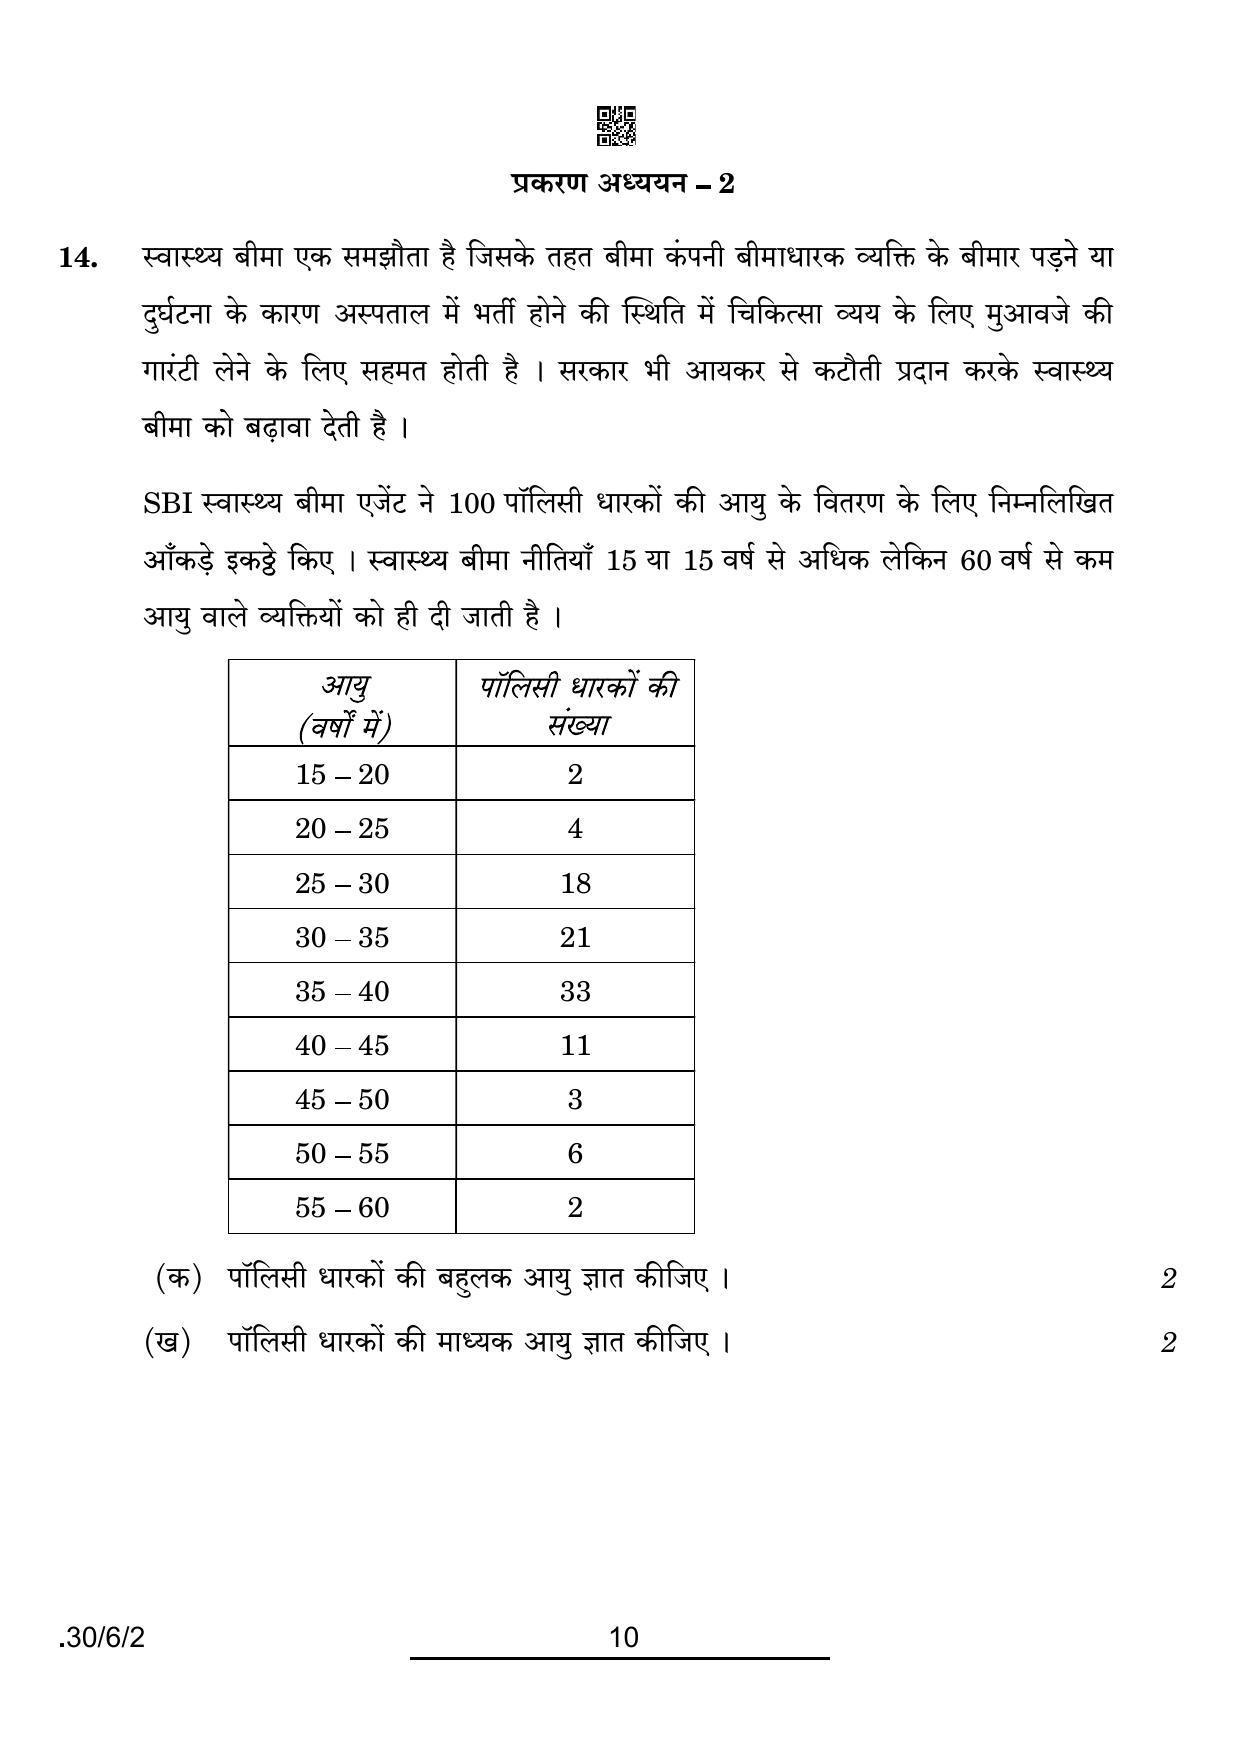 CBSE Class 10 30-6-2 Maths Std. 2022 Compartment Question Paper - Page 10